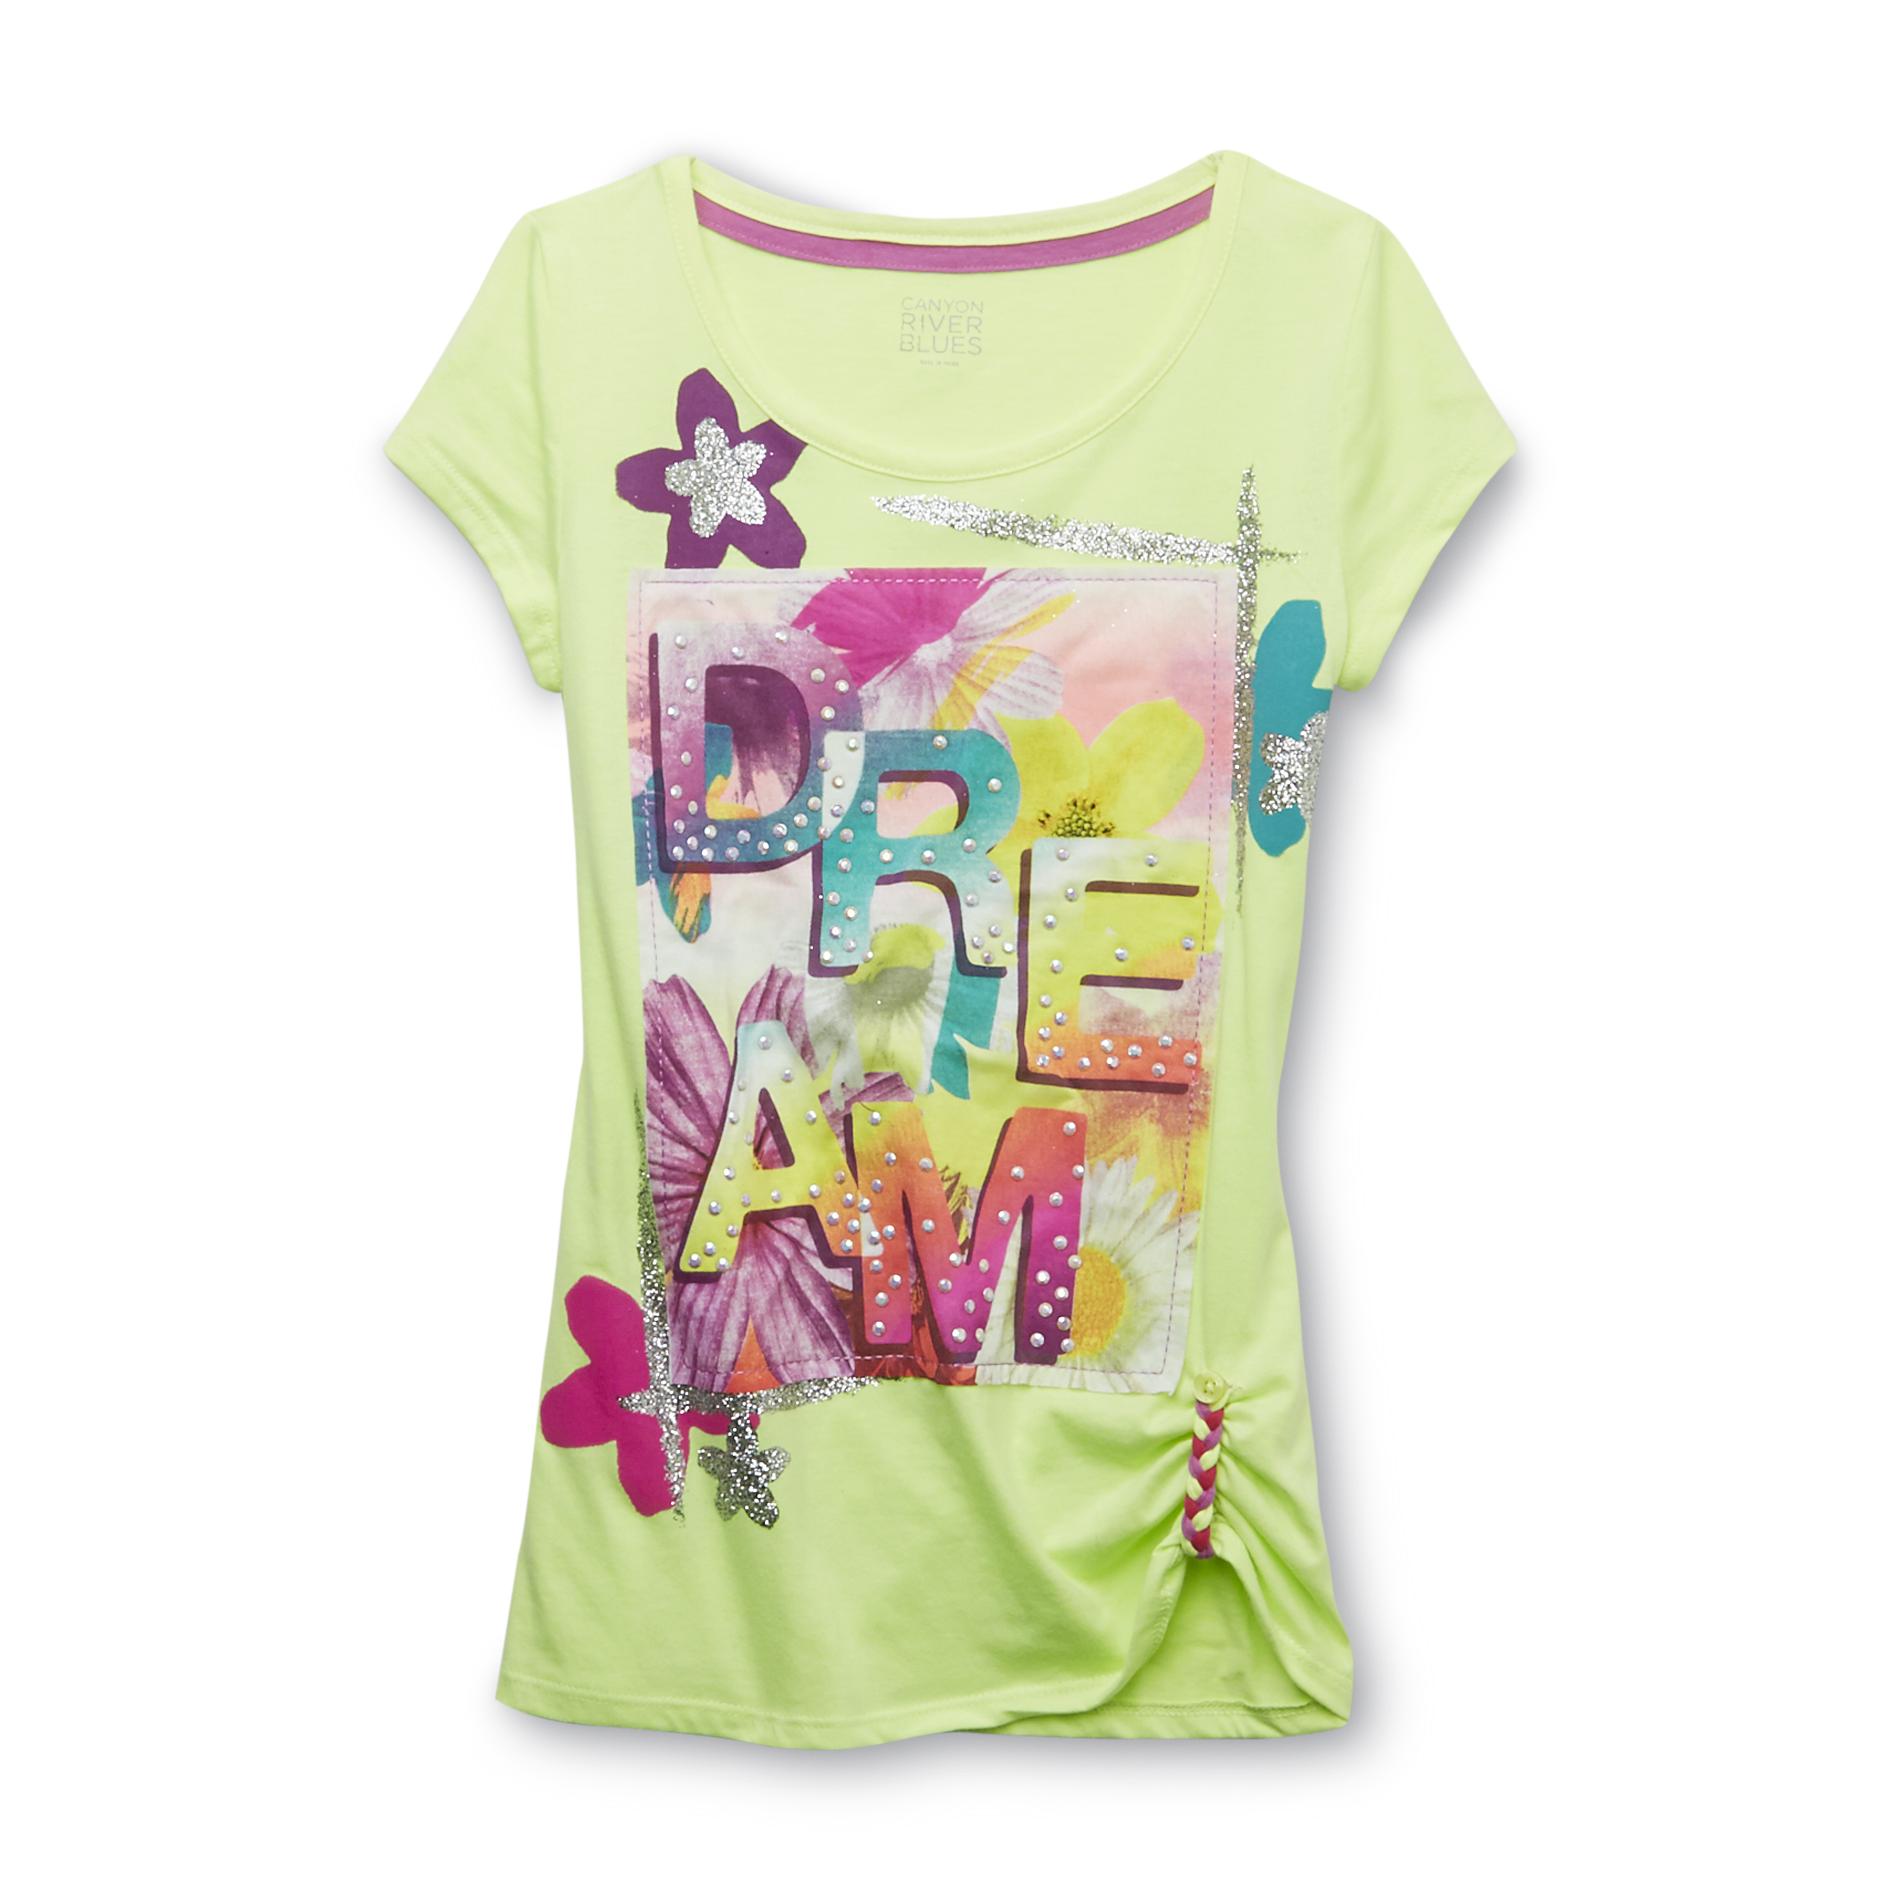 Canyon River Blues Girl's Embellished Top - Dream